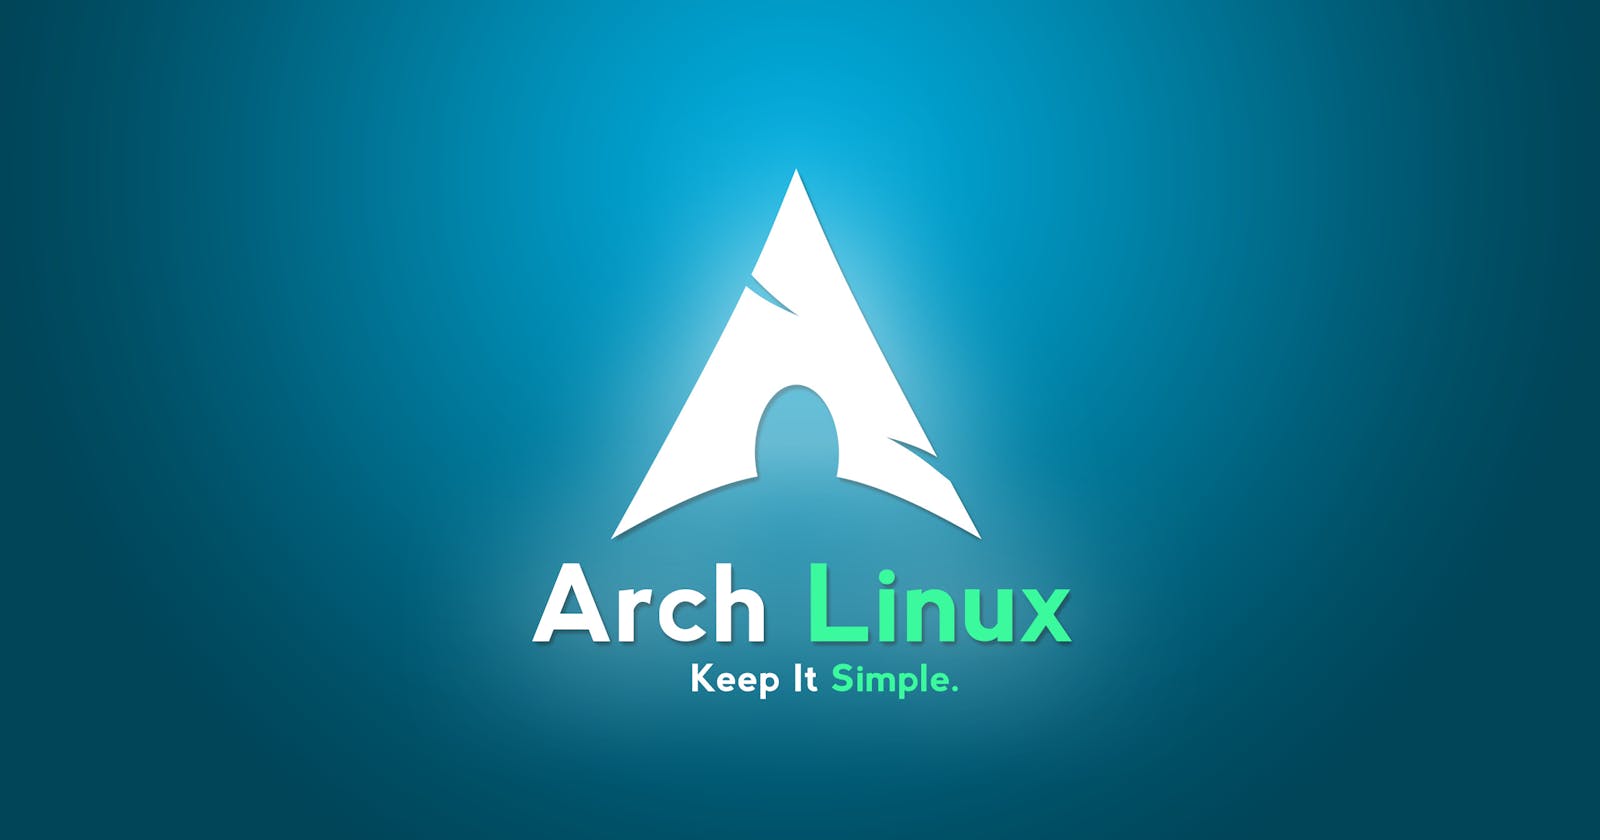 Quick post-installation setup for ArchLinux